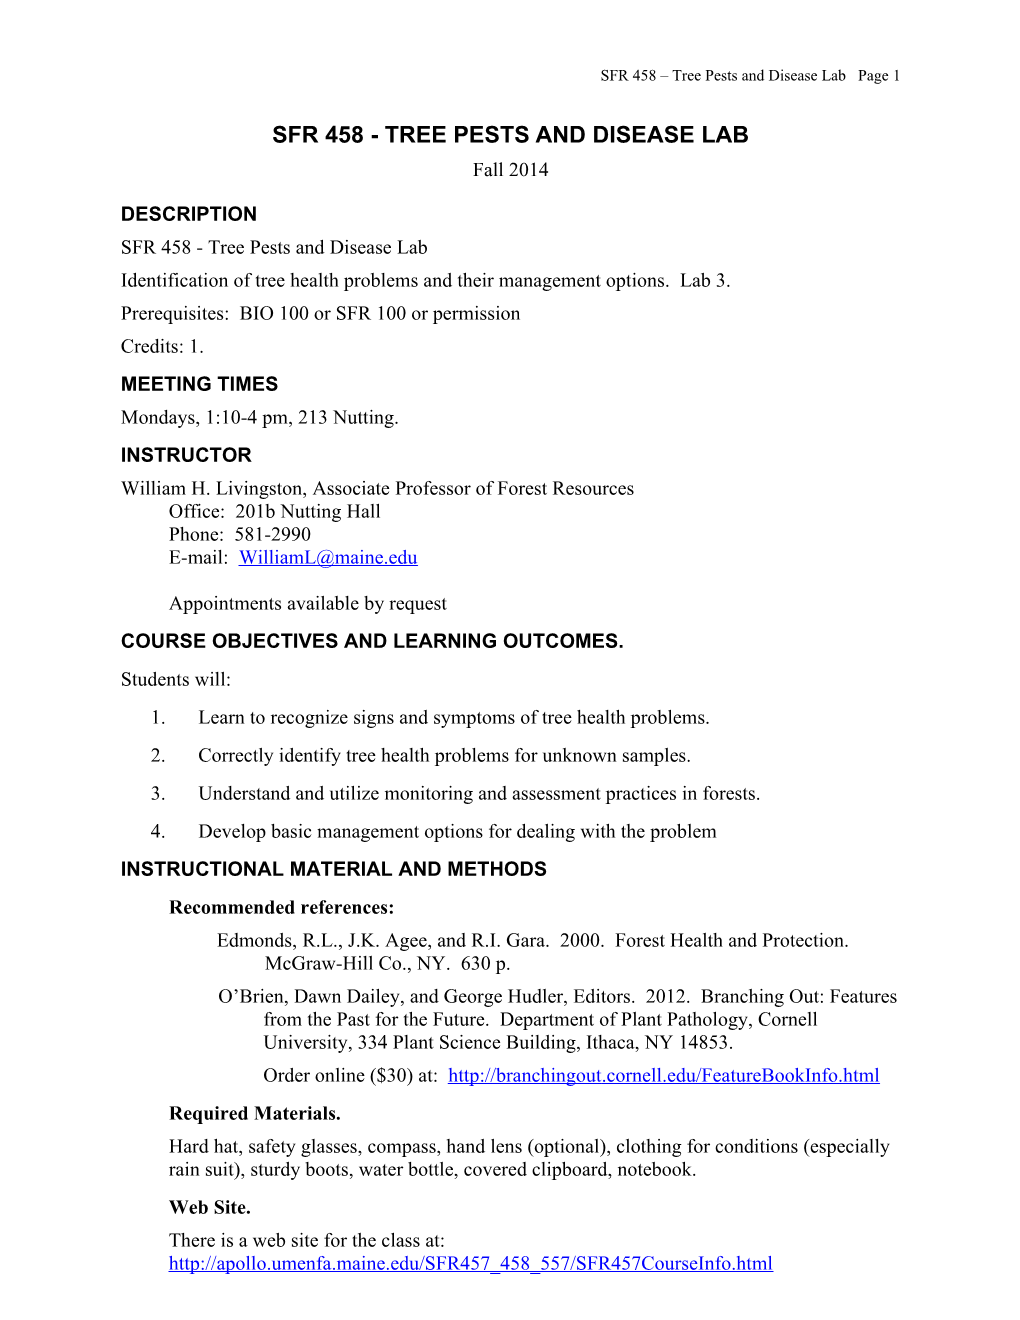 SFR 458 Tree Pests and Disease Lab Page 3